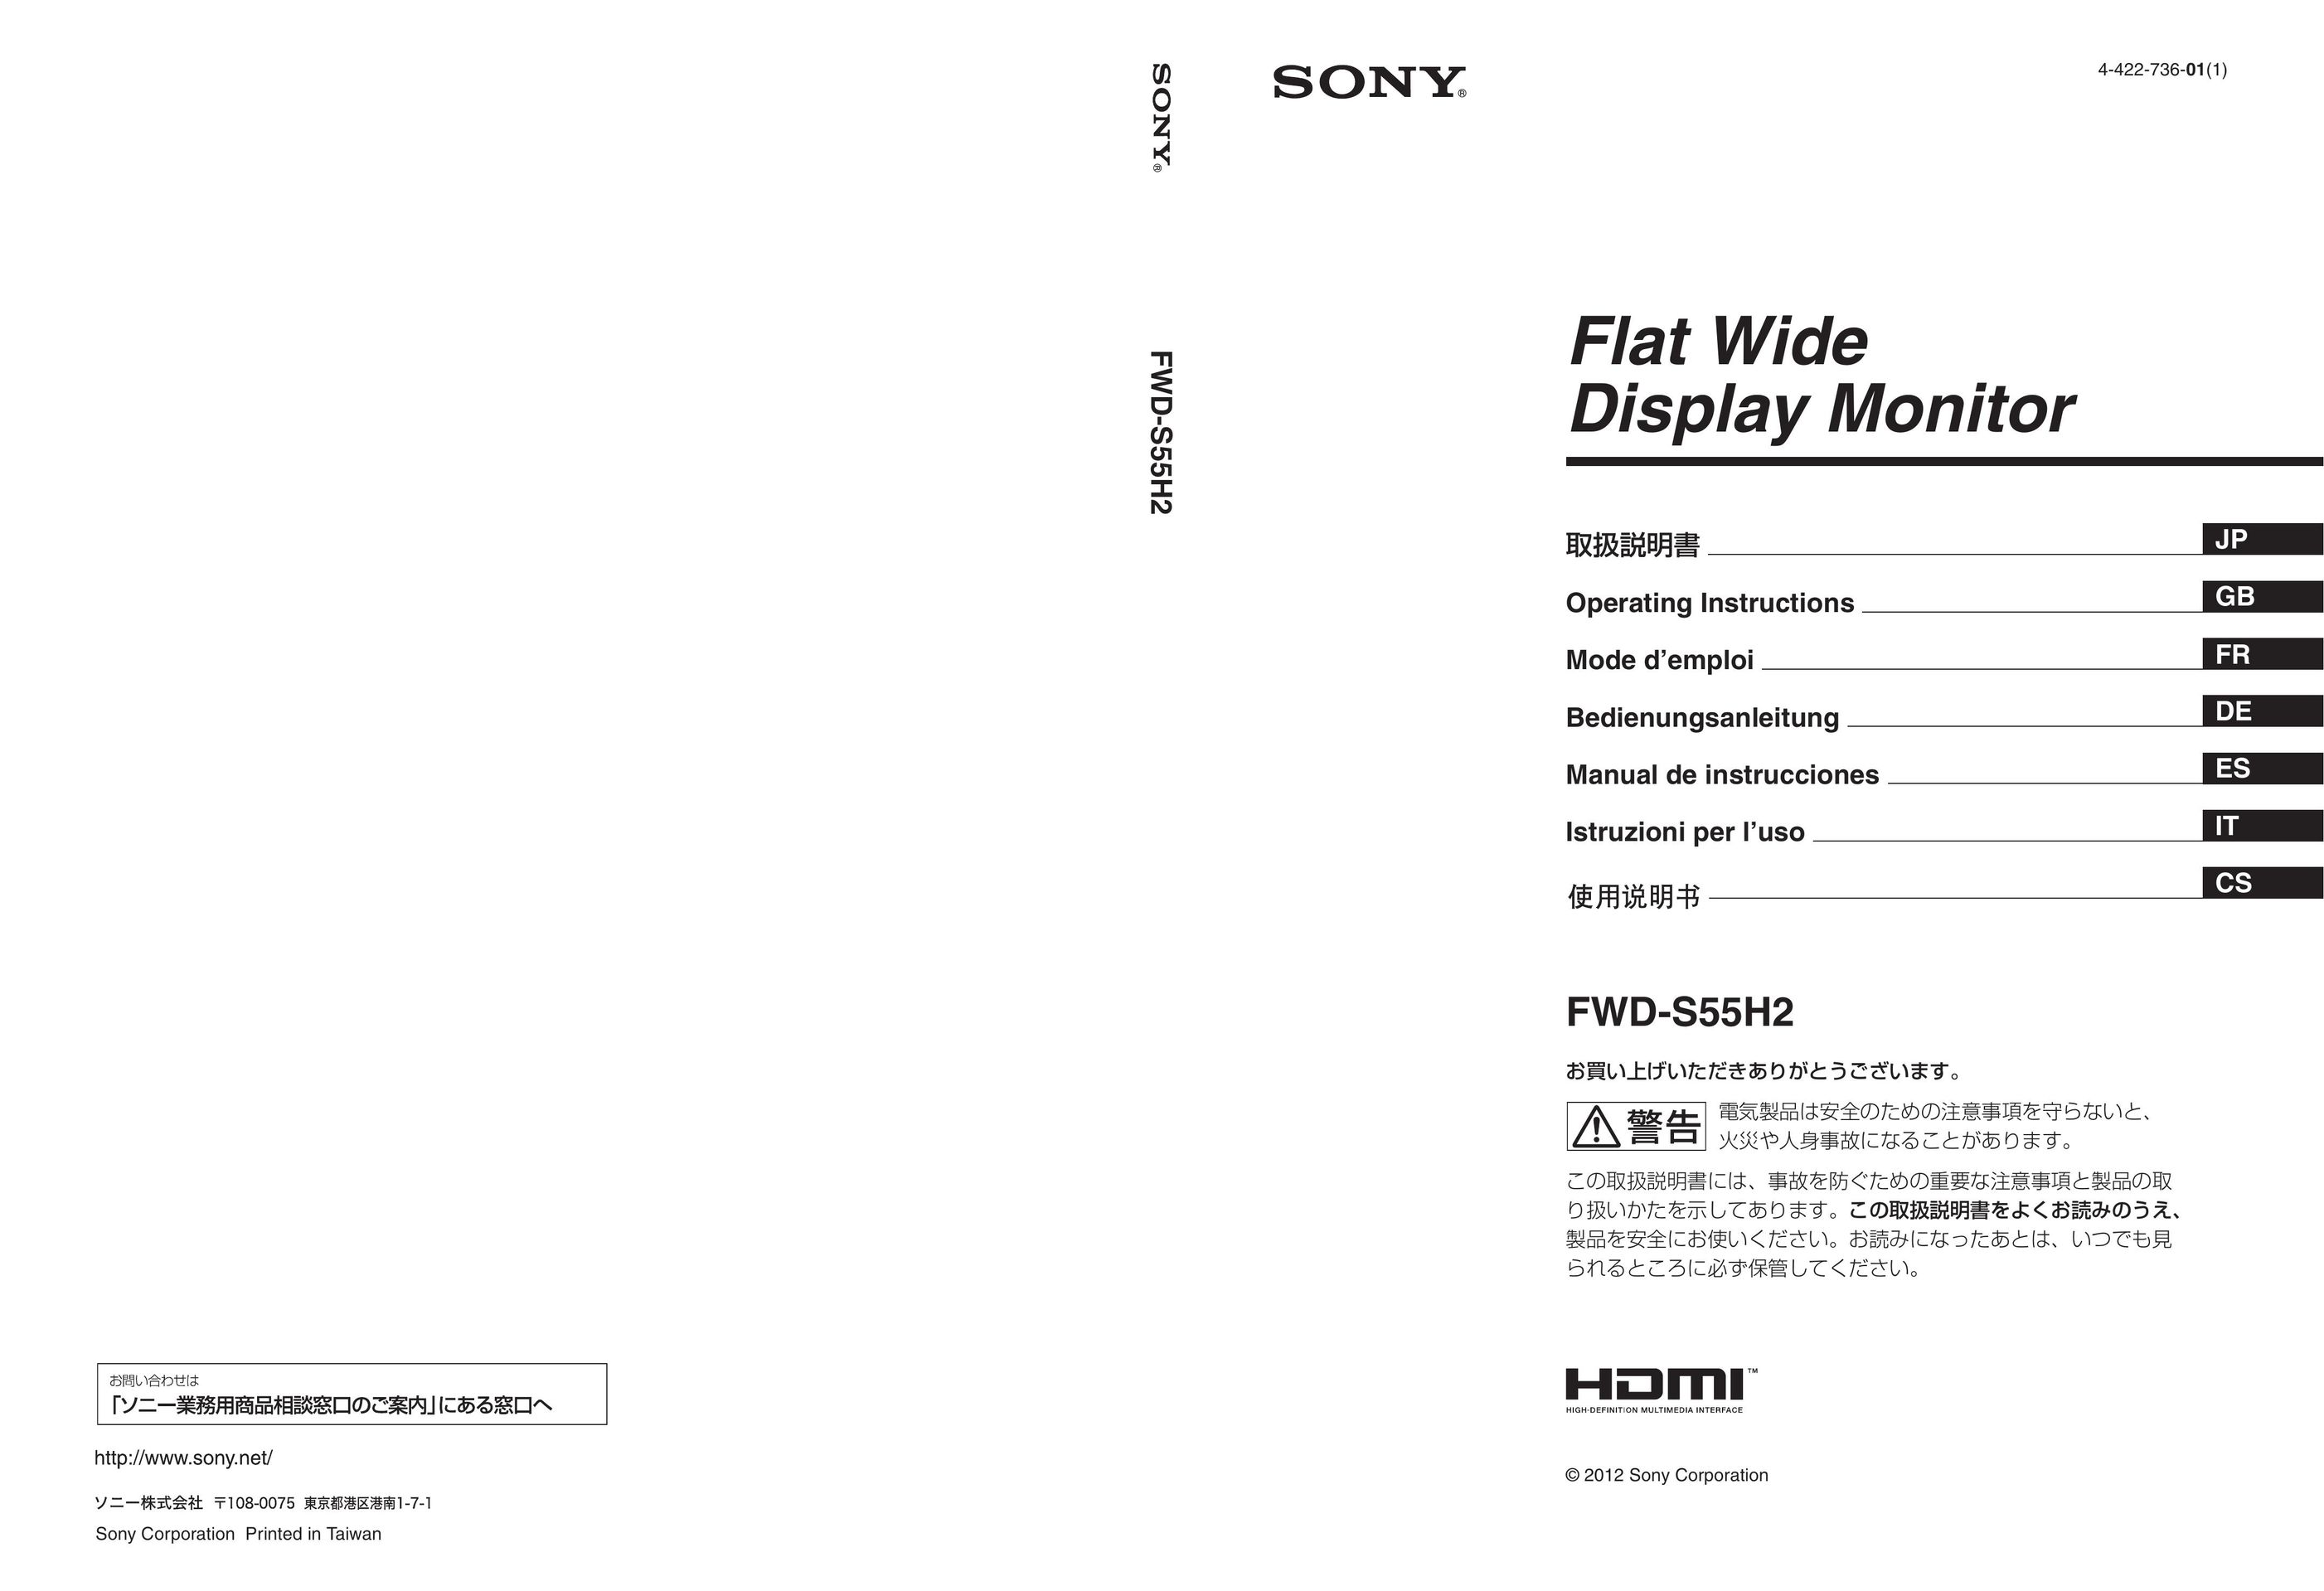 Sony FWD-S55H2 Car Satellite TV System User Manual